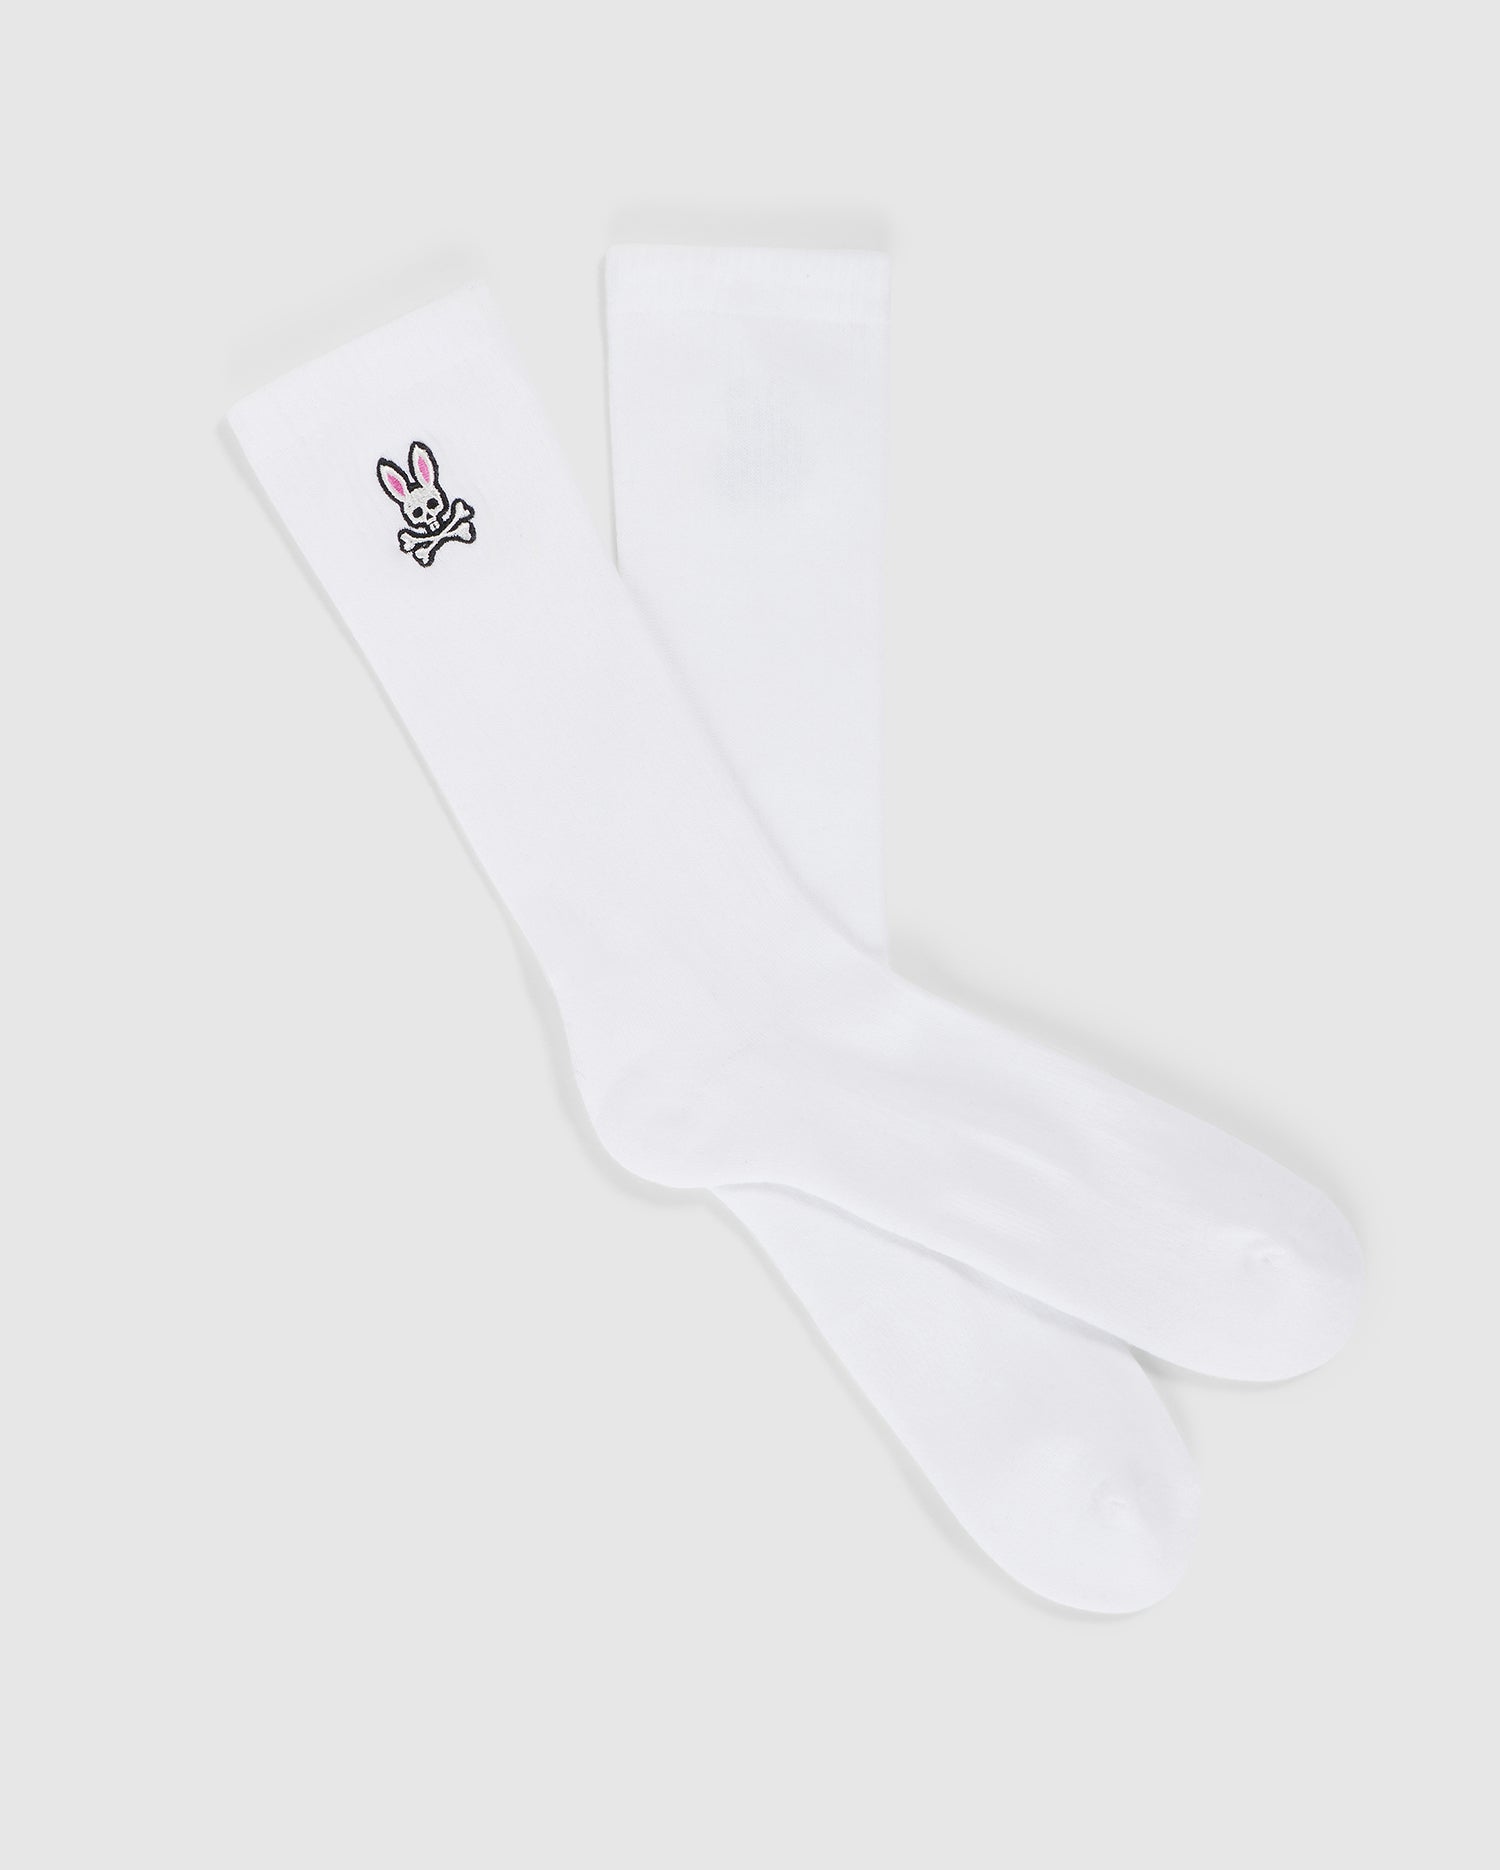 A pair of MENS FASHION SOCKS - B6F486C200 from Psycho Bunny, made from luxurious Pima cotton, featuring a small embroidered bunny design near the top. The bunny is depicted in black outline with a pink nose and ears, adorning only one sock. These stylish socks are made in Peru and offer both comfort and charm.